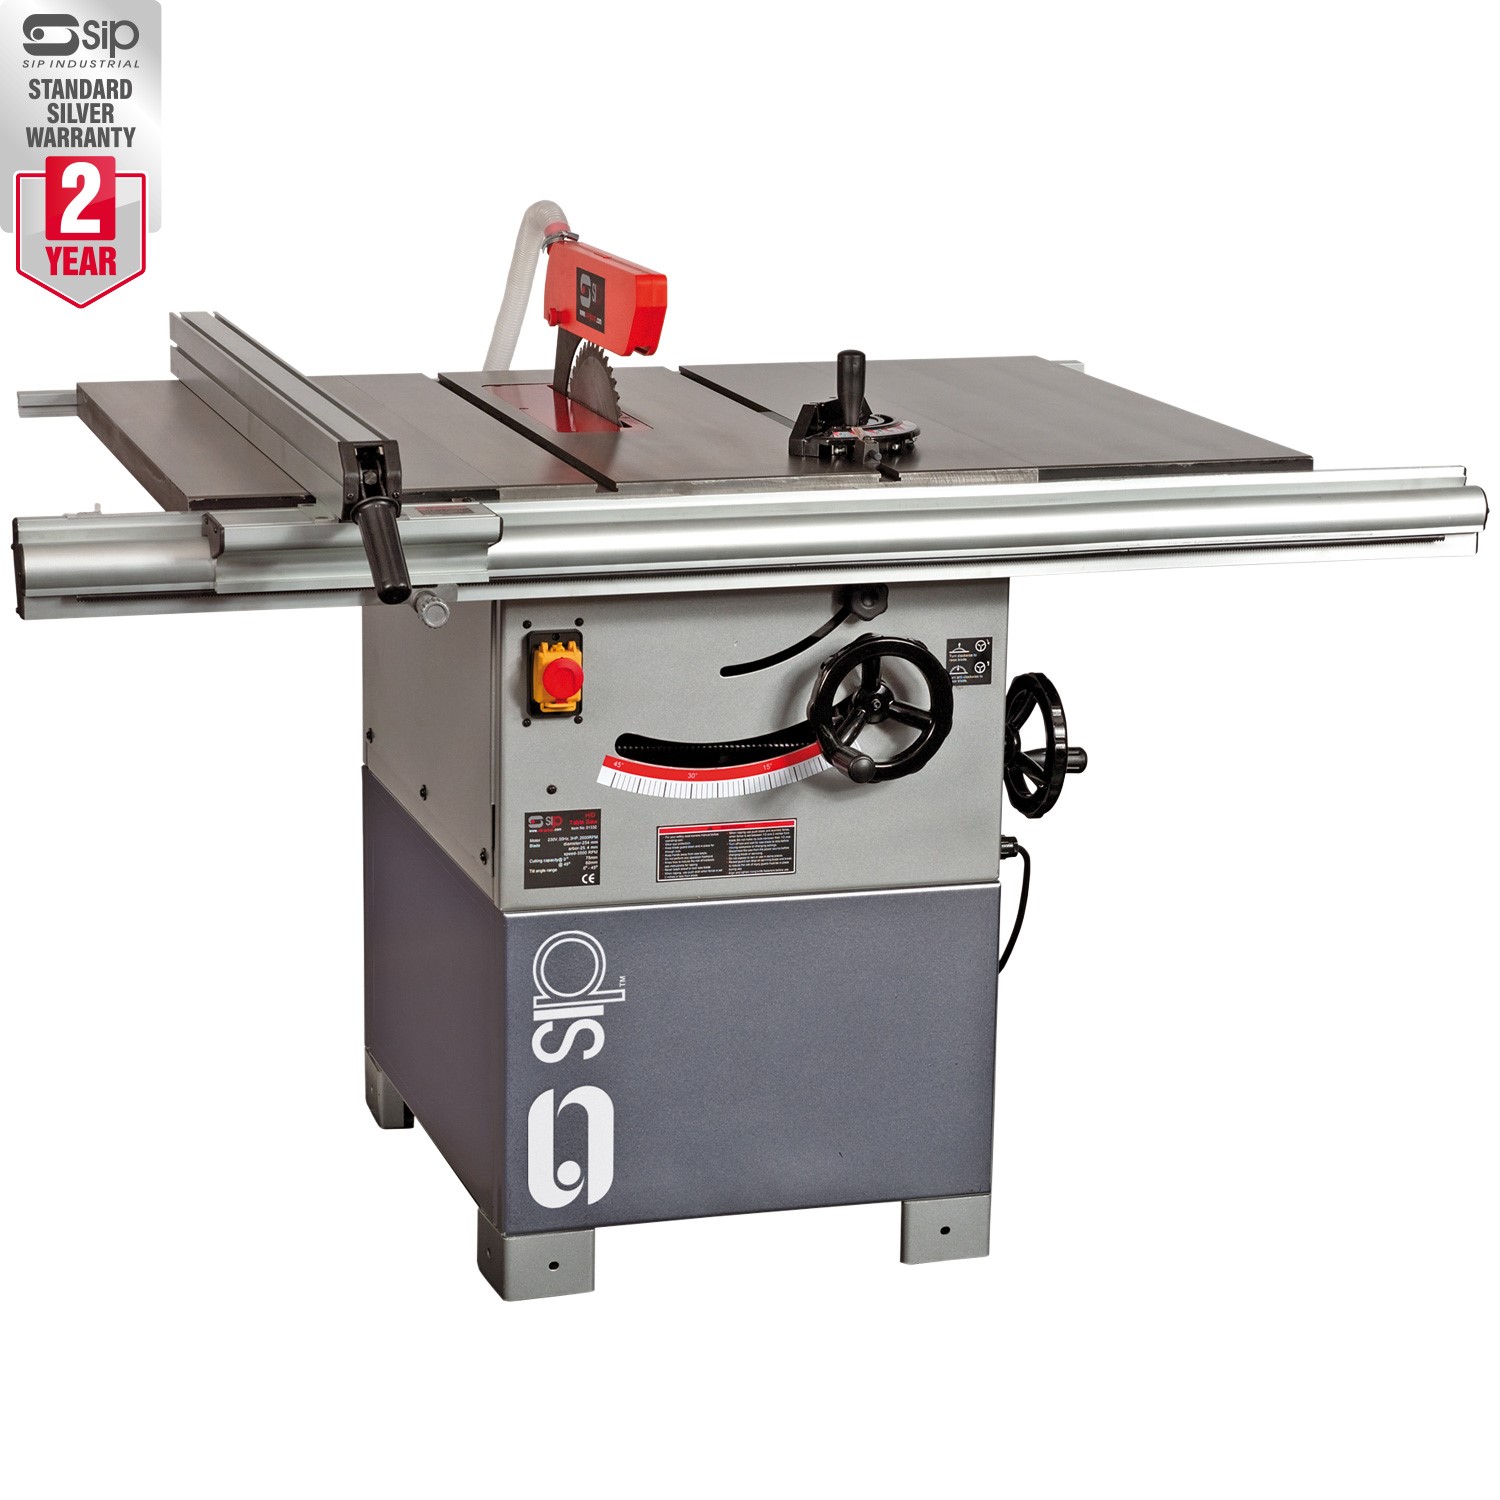 SIP 12 Professional Cast Iron Table Saw - SIP Industrial Products